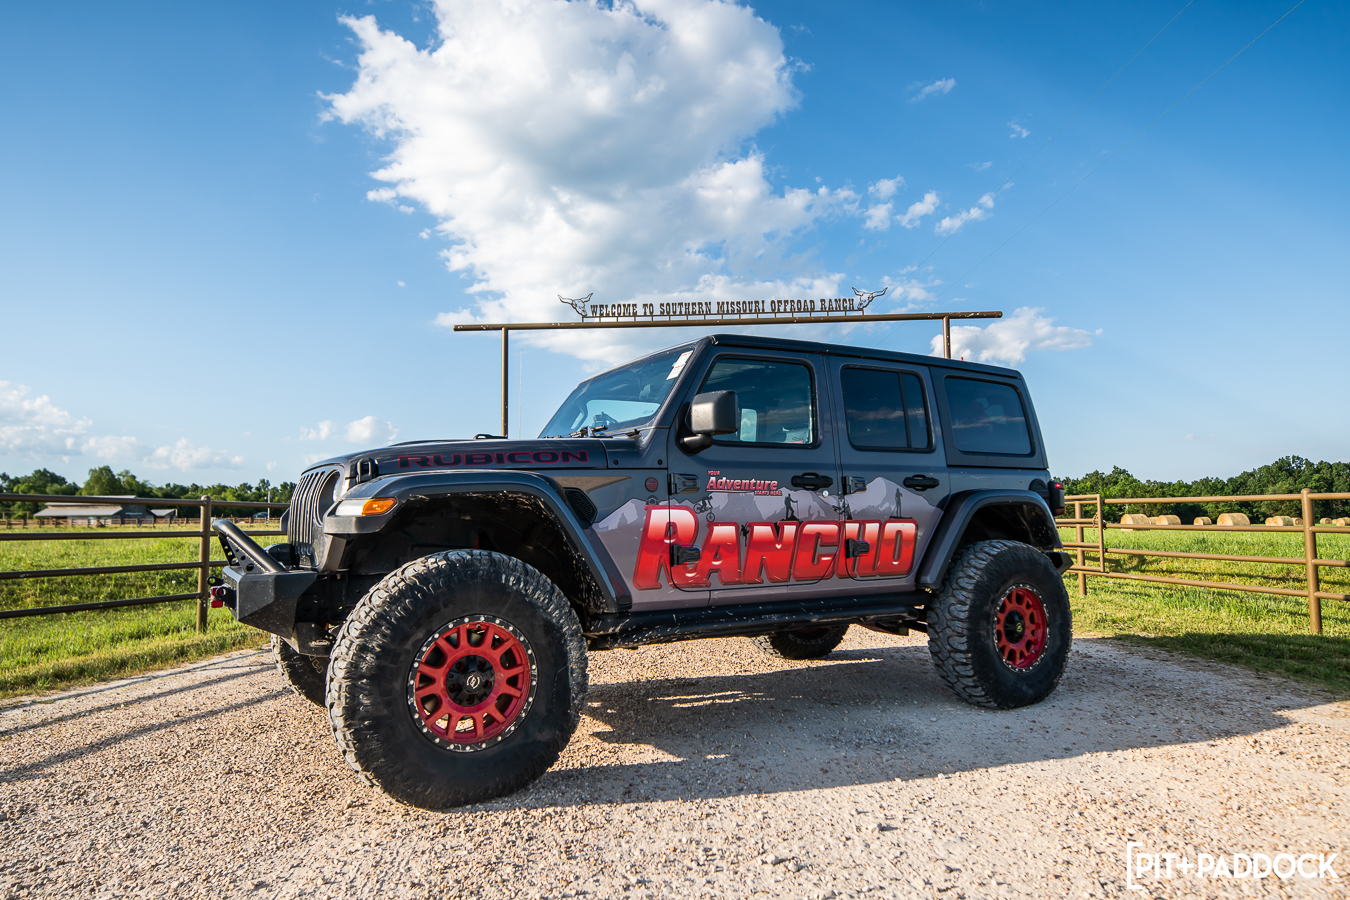 Road, Show & Trail: Rancho's Jeep Wrangler JL is Outfitted to Perform